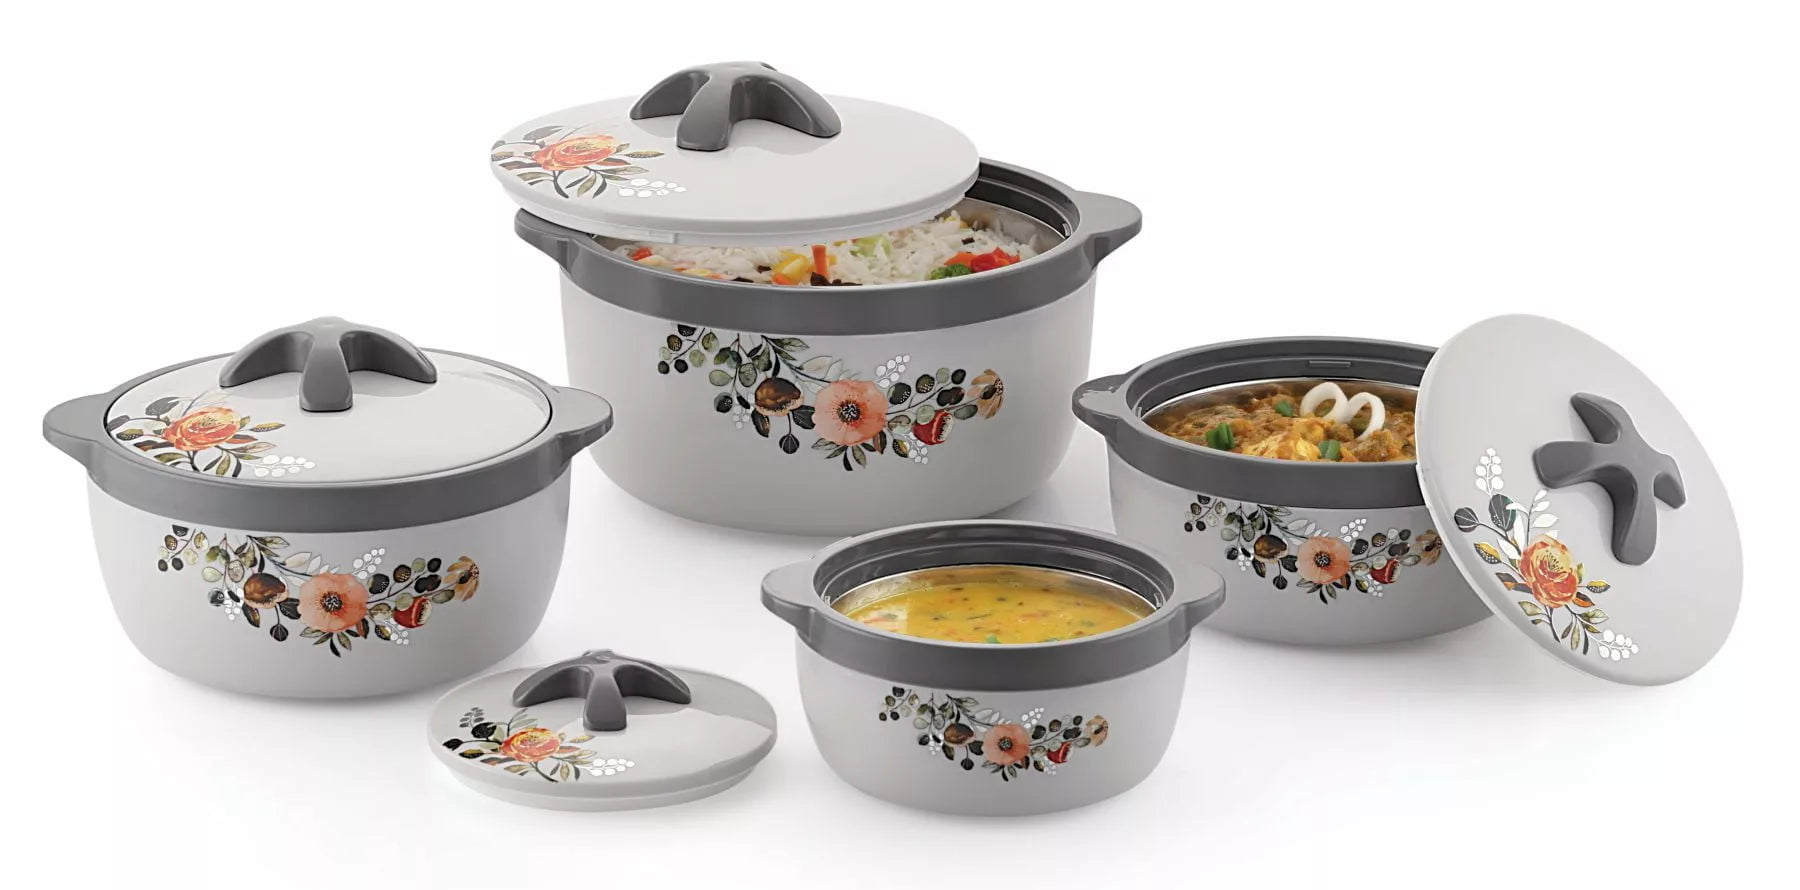 Insulated Stainless Steel Casserole Set of 3, Sancy - Pearlpet